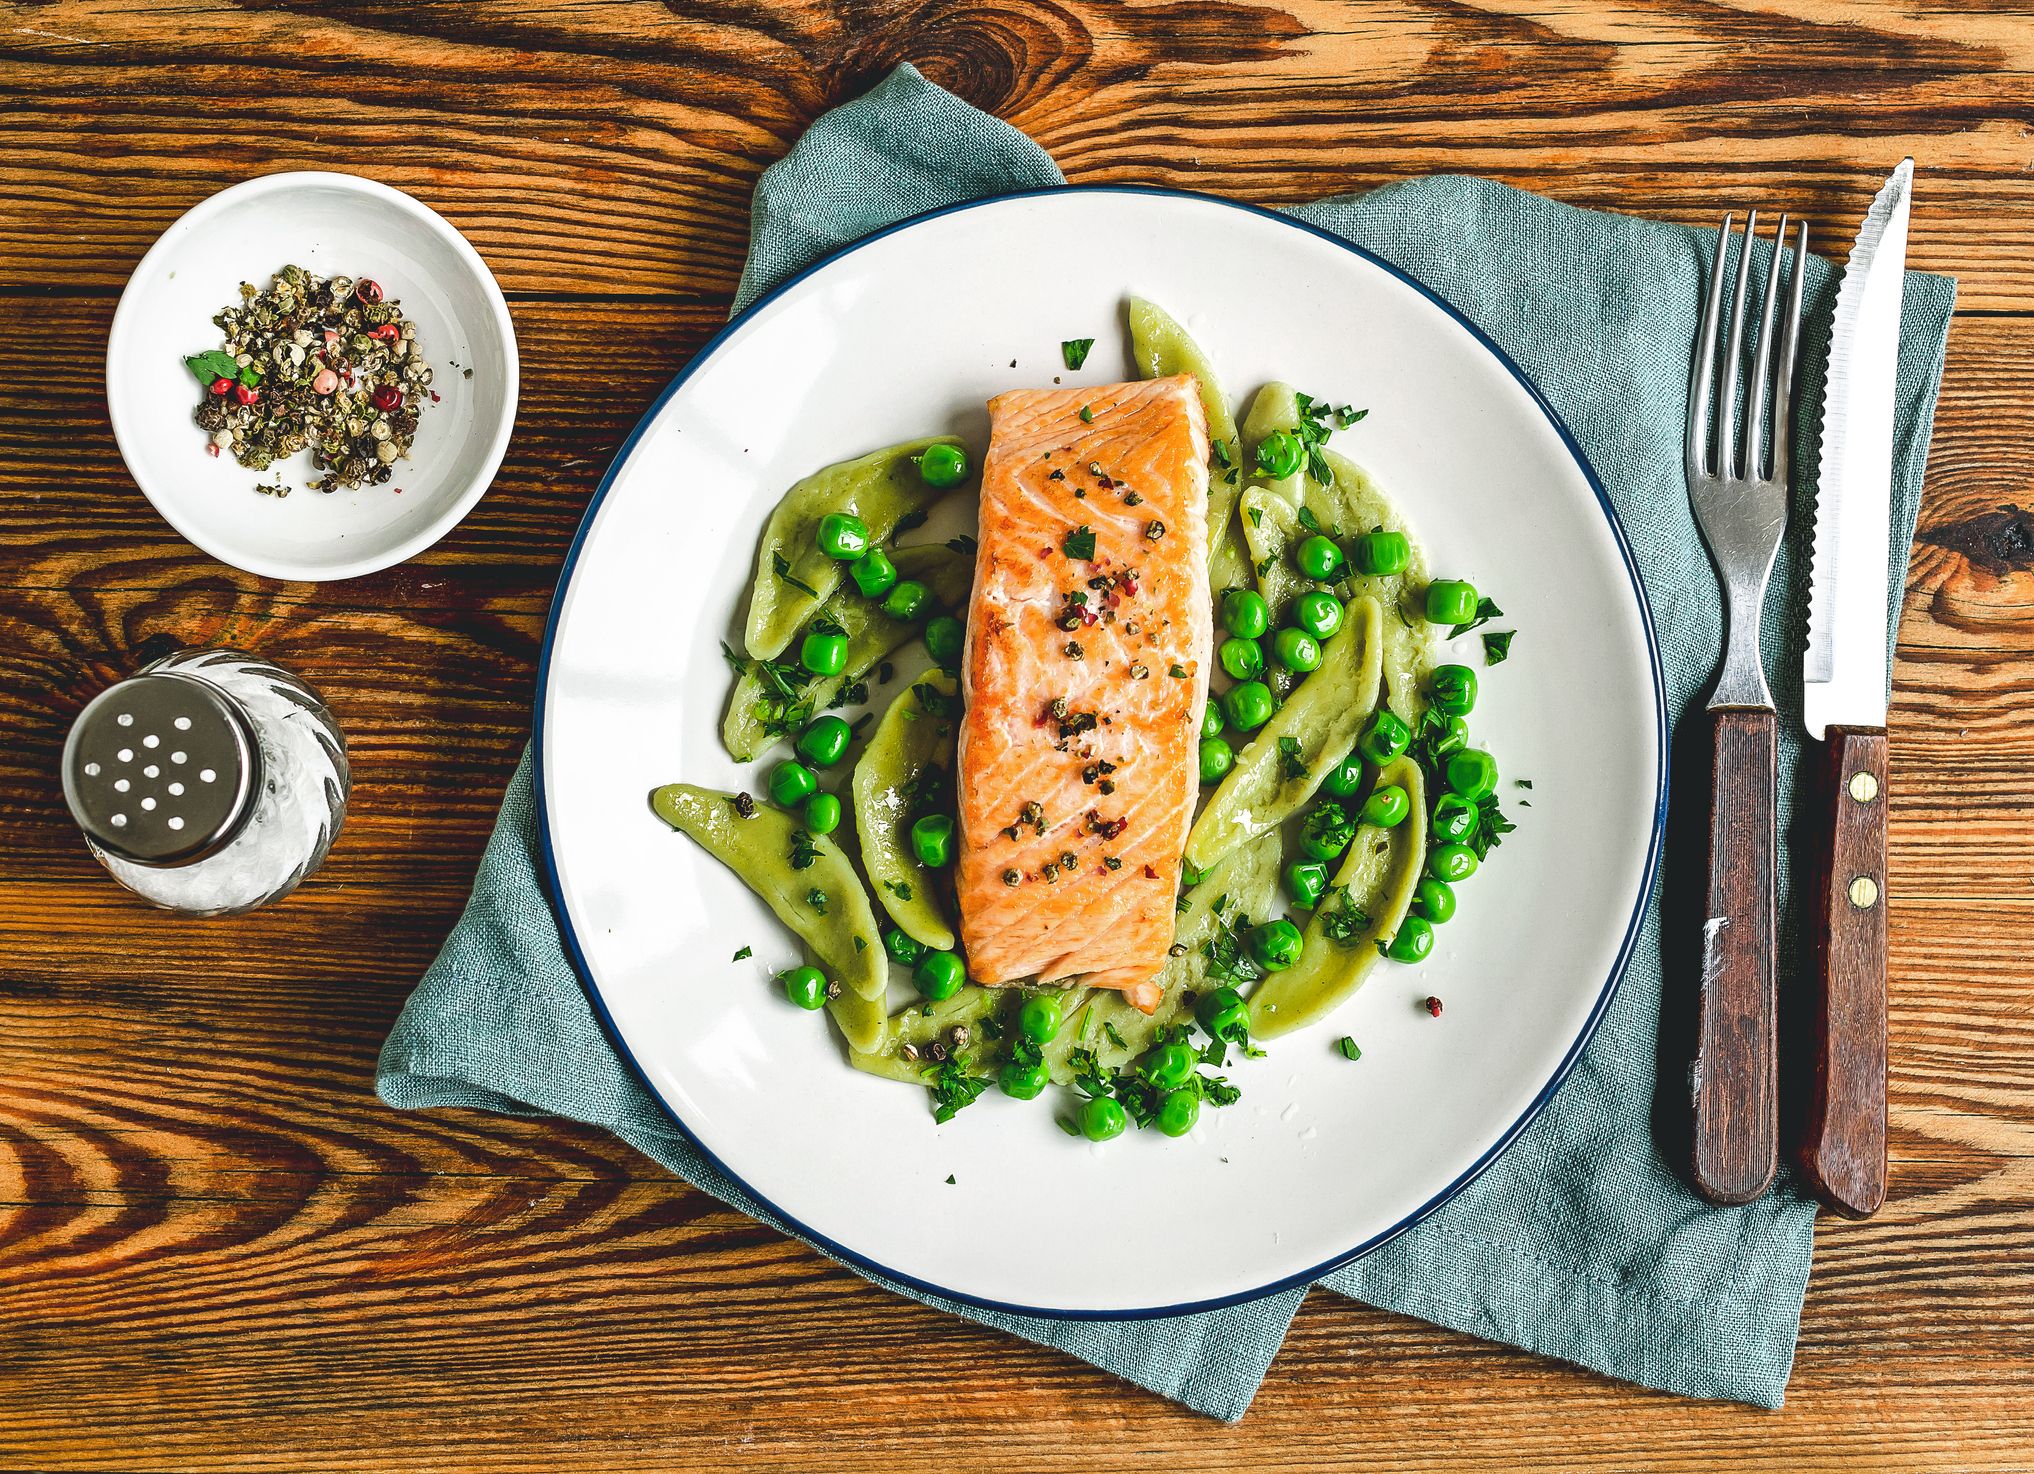 Pink Salmon Benefits and Recipe